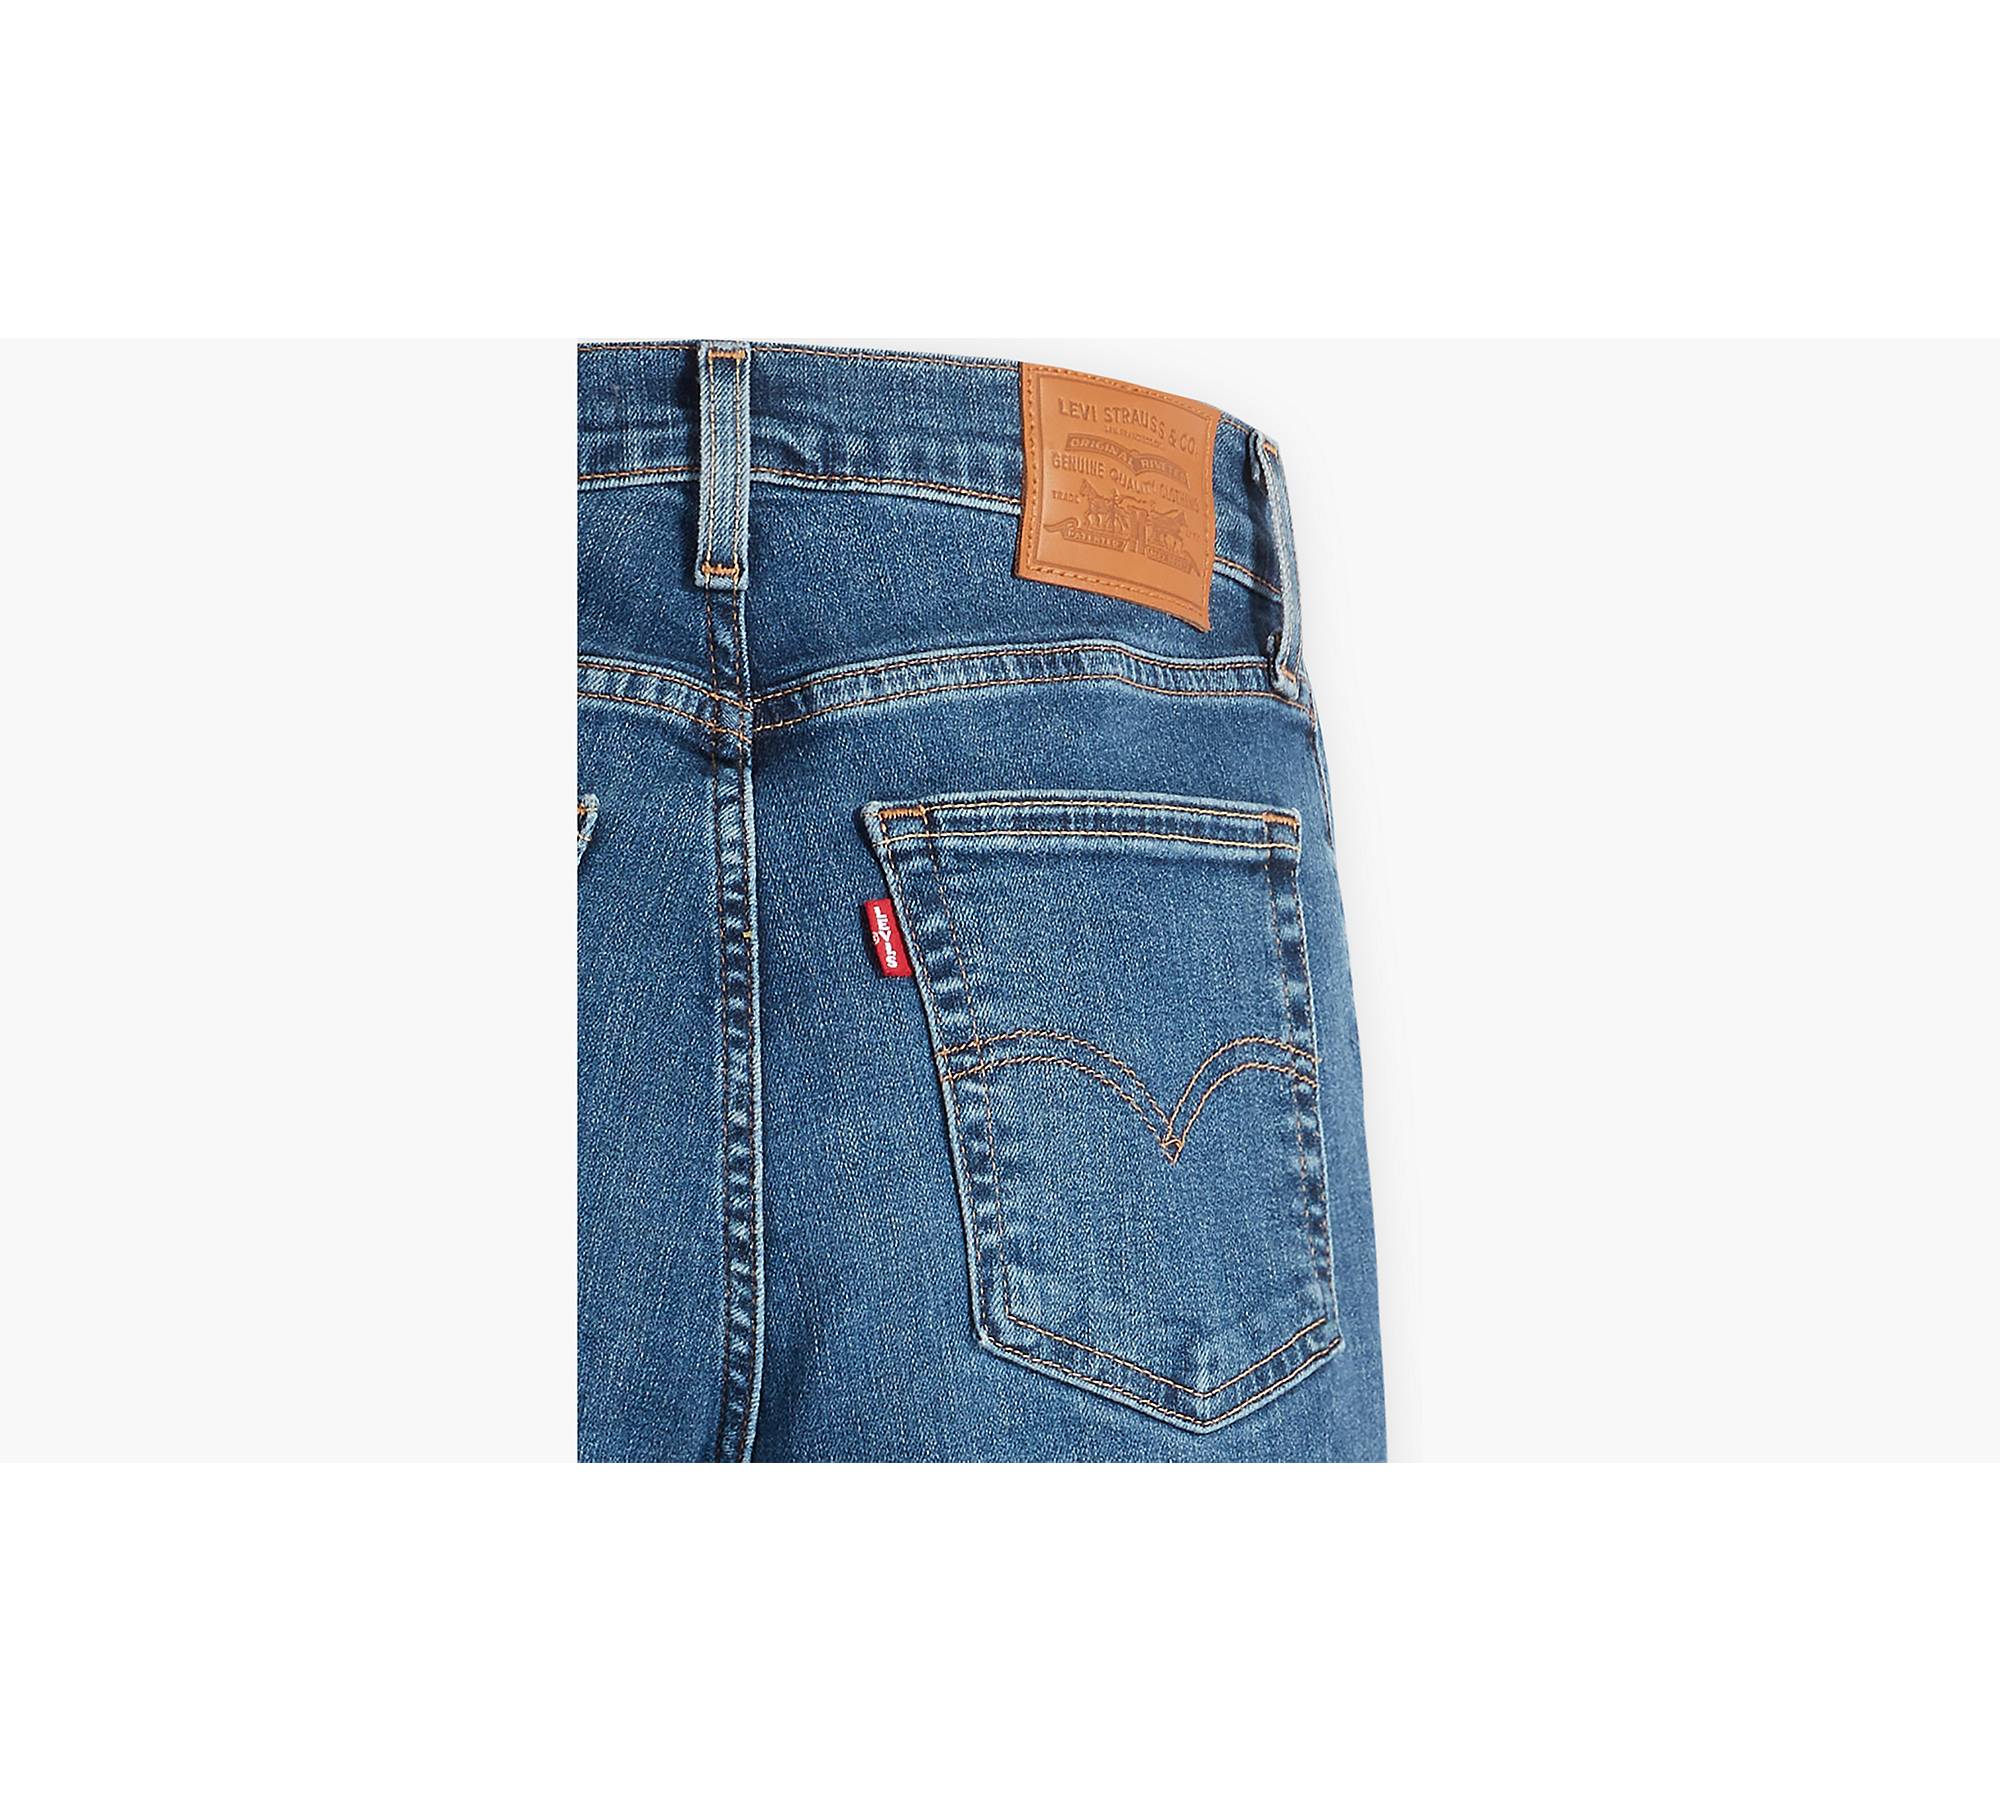 Levi's Women's High Waisted Taper Jeans, 26986-0002 FYI, 24W x 27L :  : Fashion